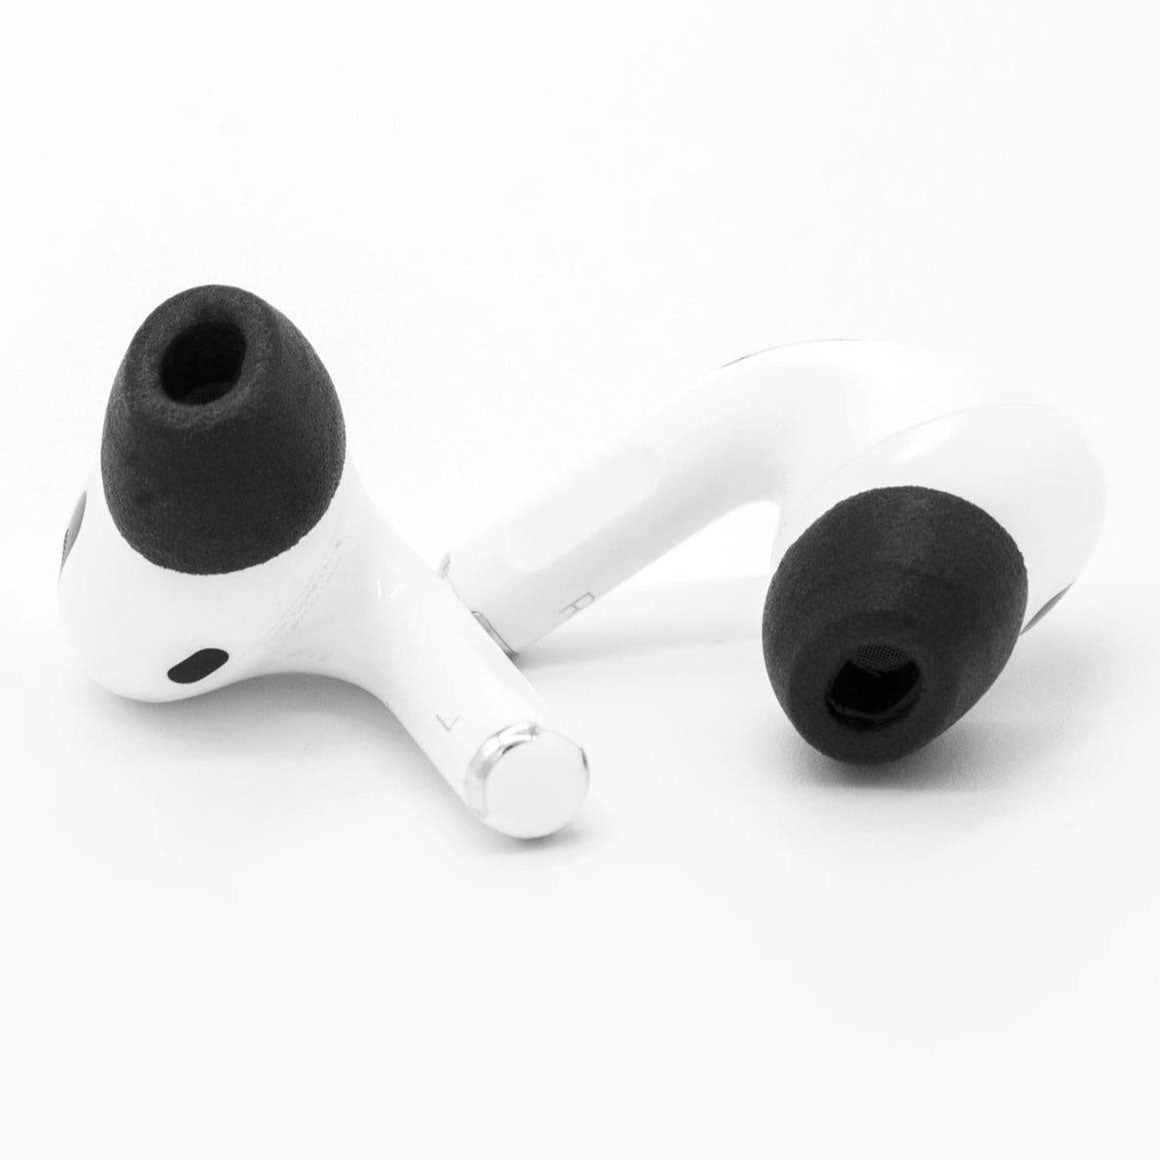 Comply - Foam Tips For AirPods Pro